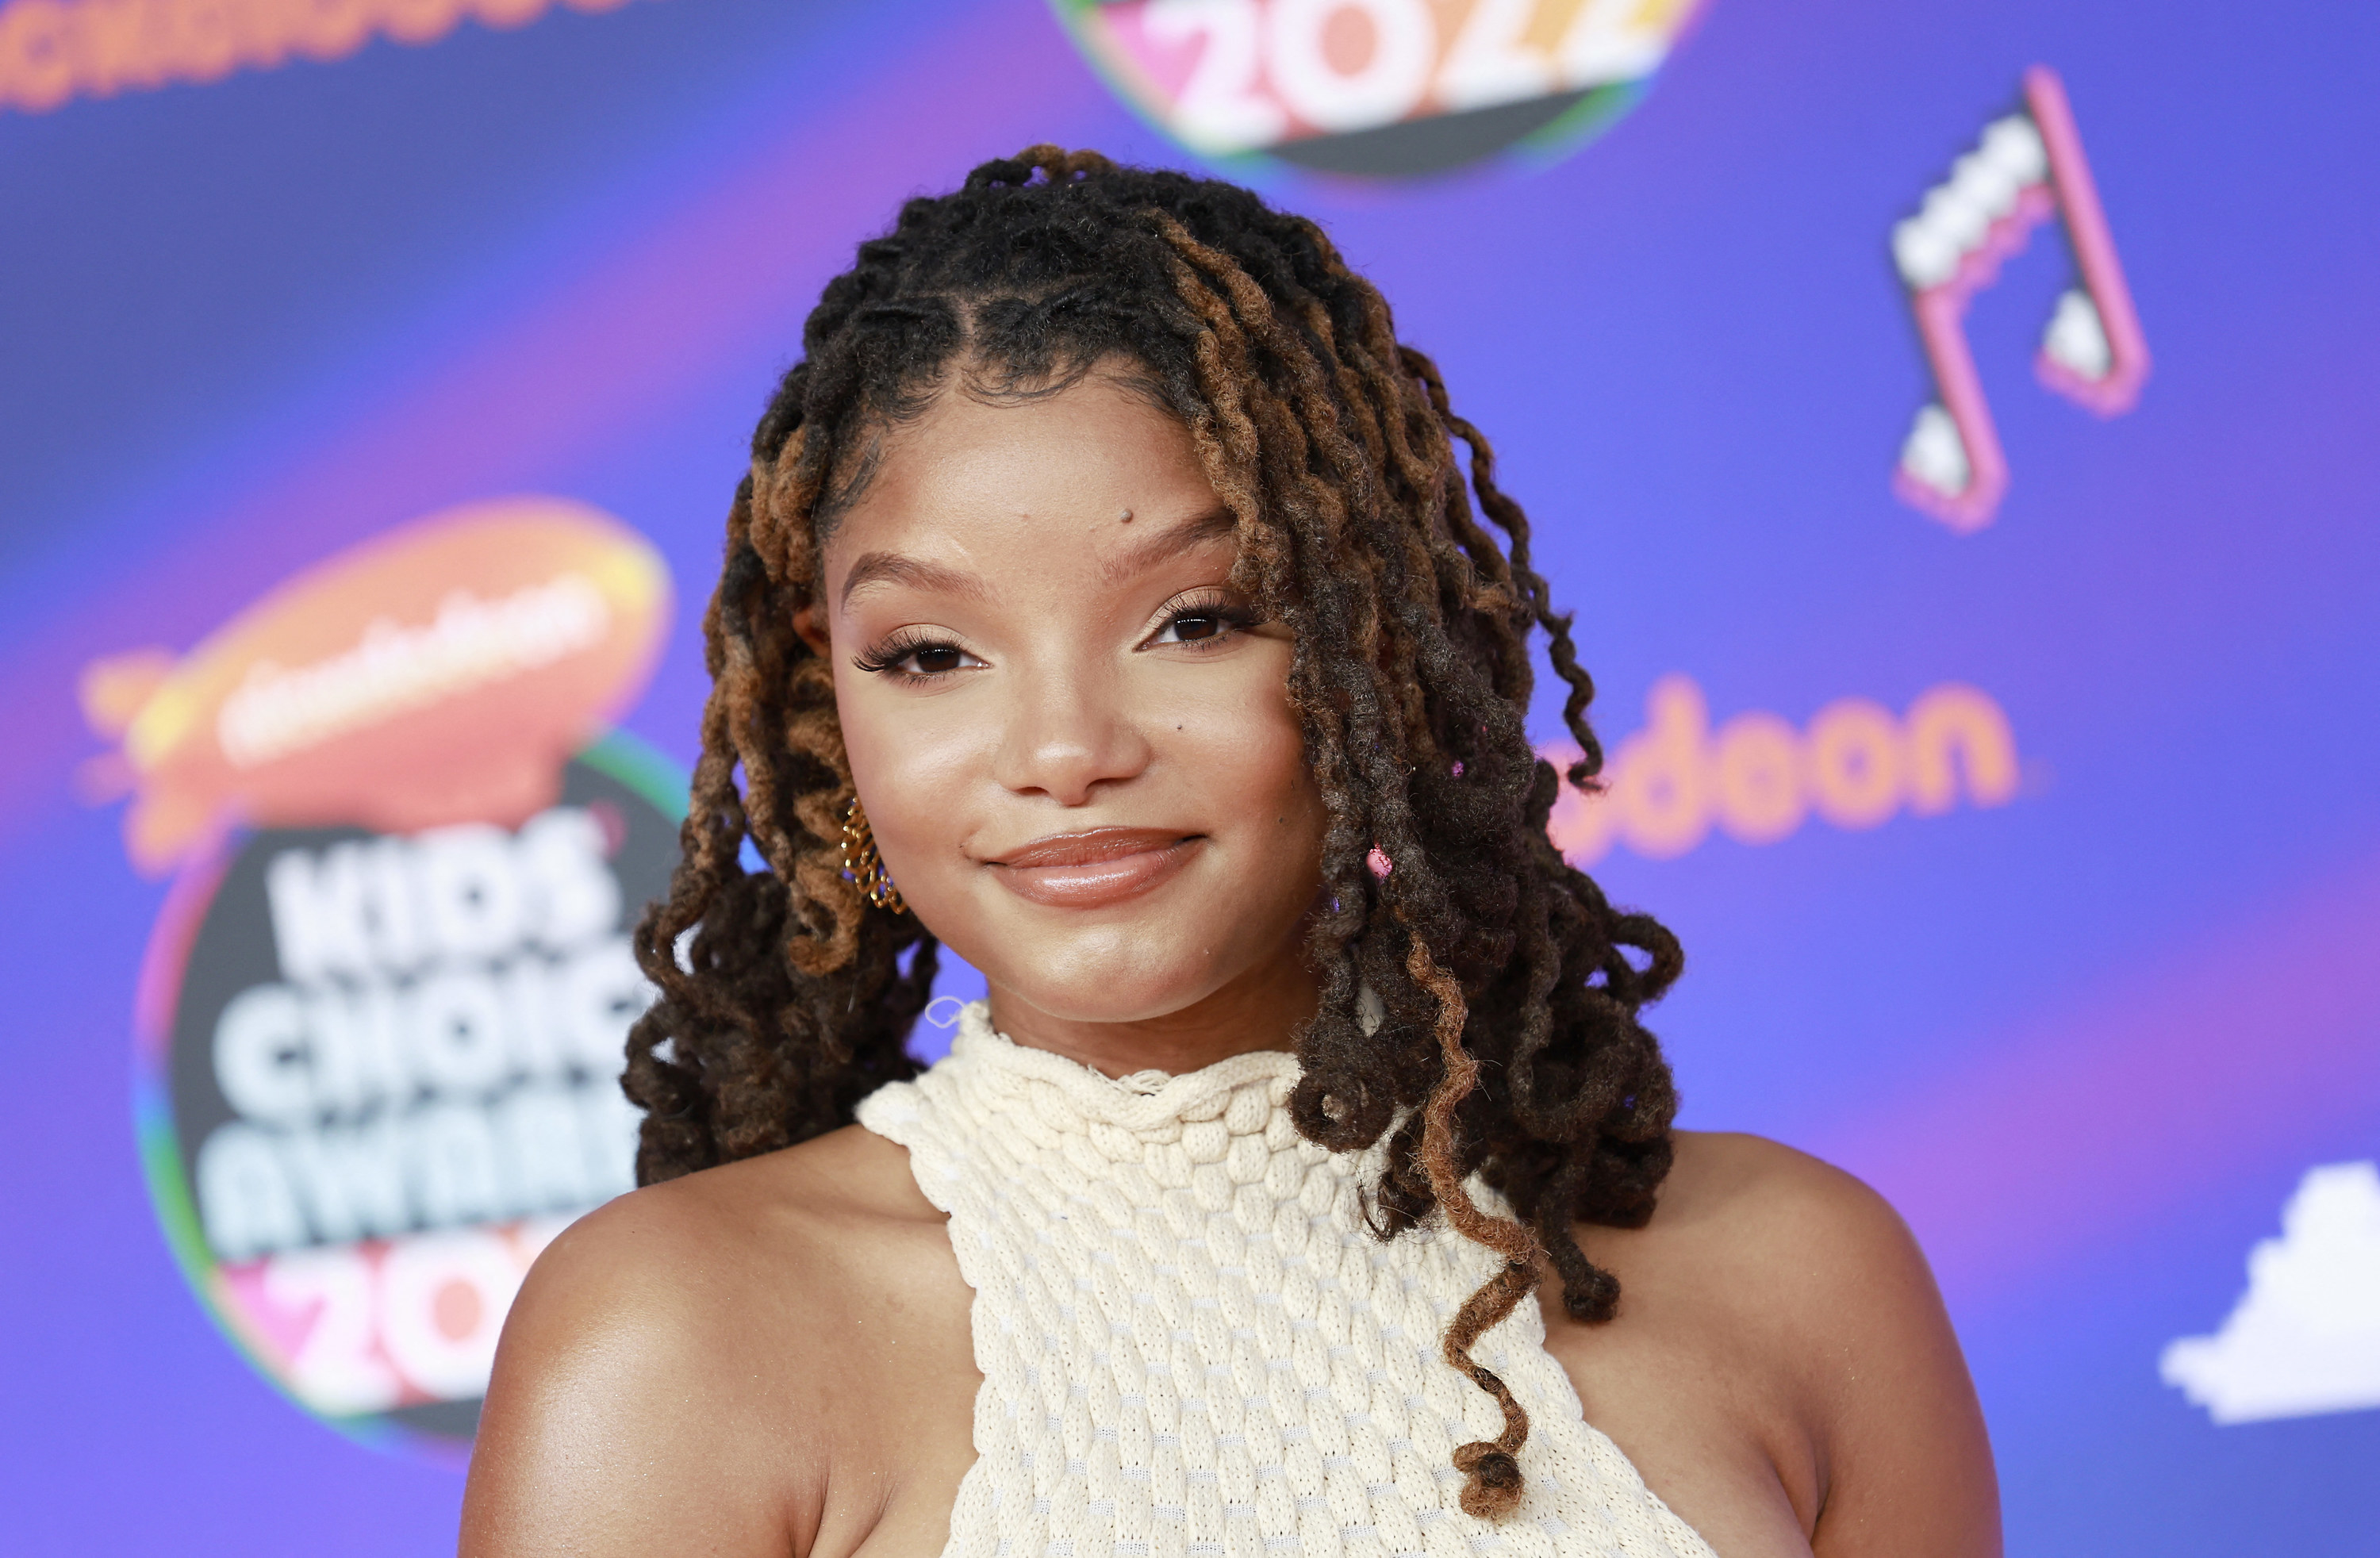 US singer Halle Bailey attends the 2022 Nickelodeon Kids&#x27; Choice Awards held at Barker Hangar in Santa Monica